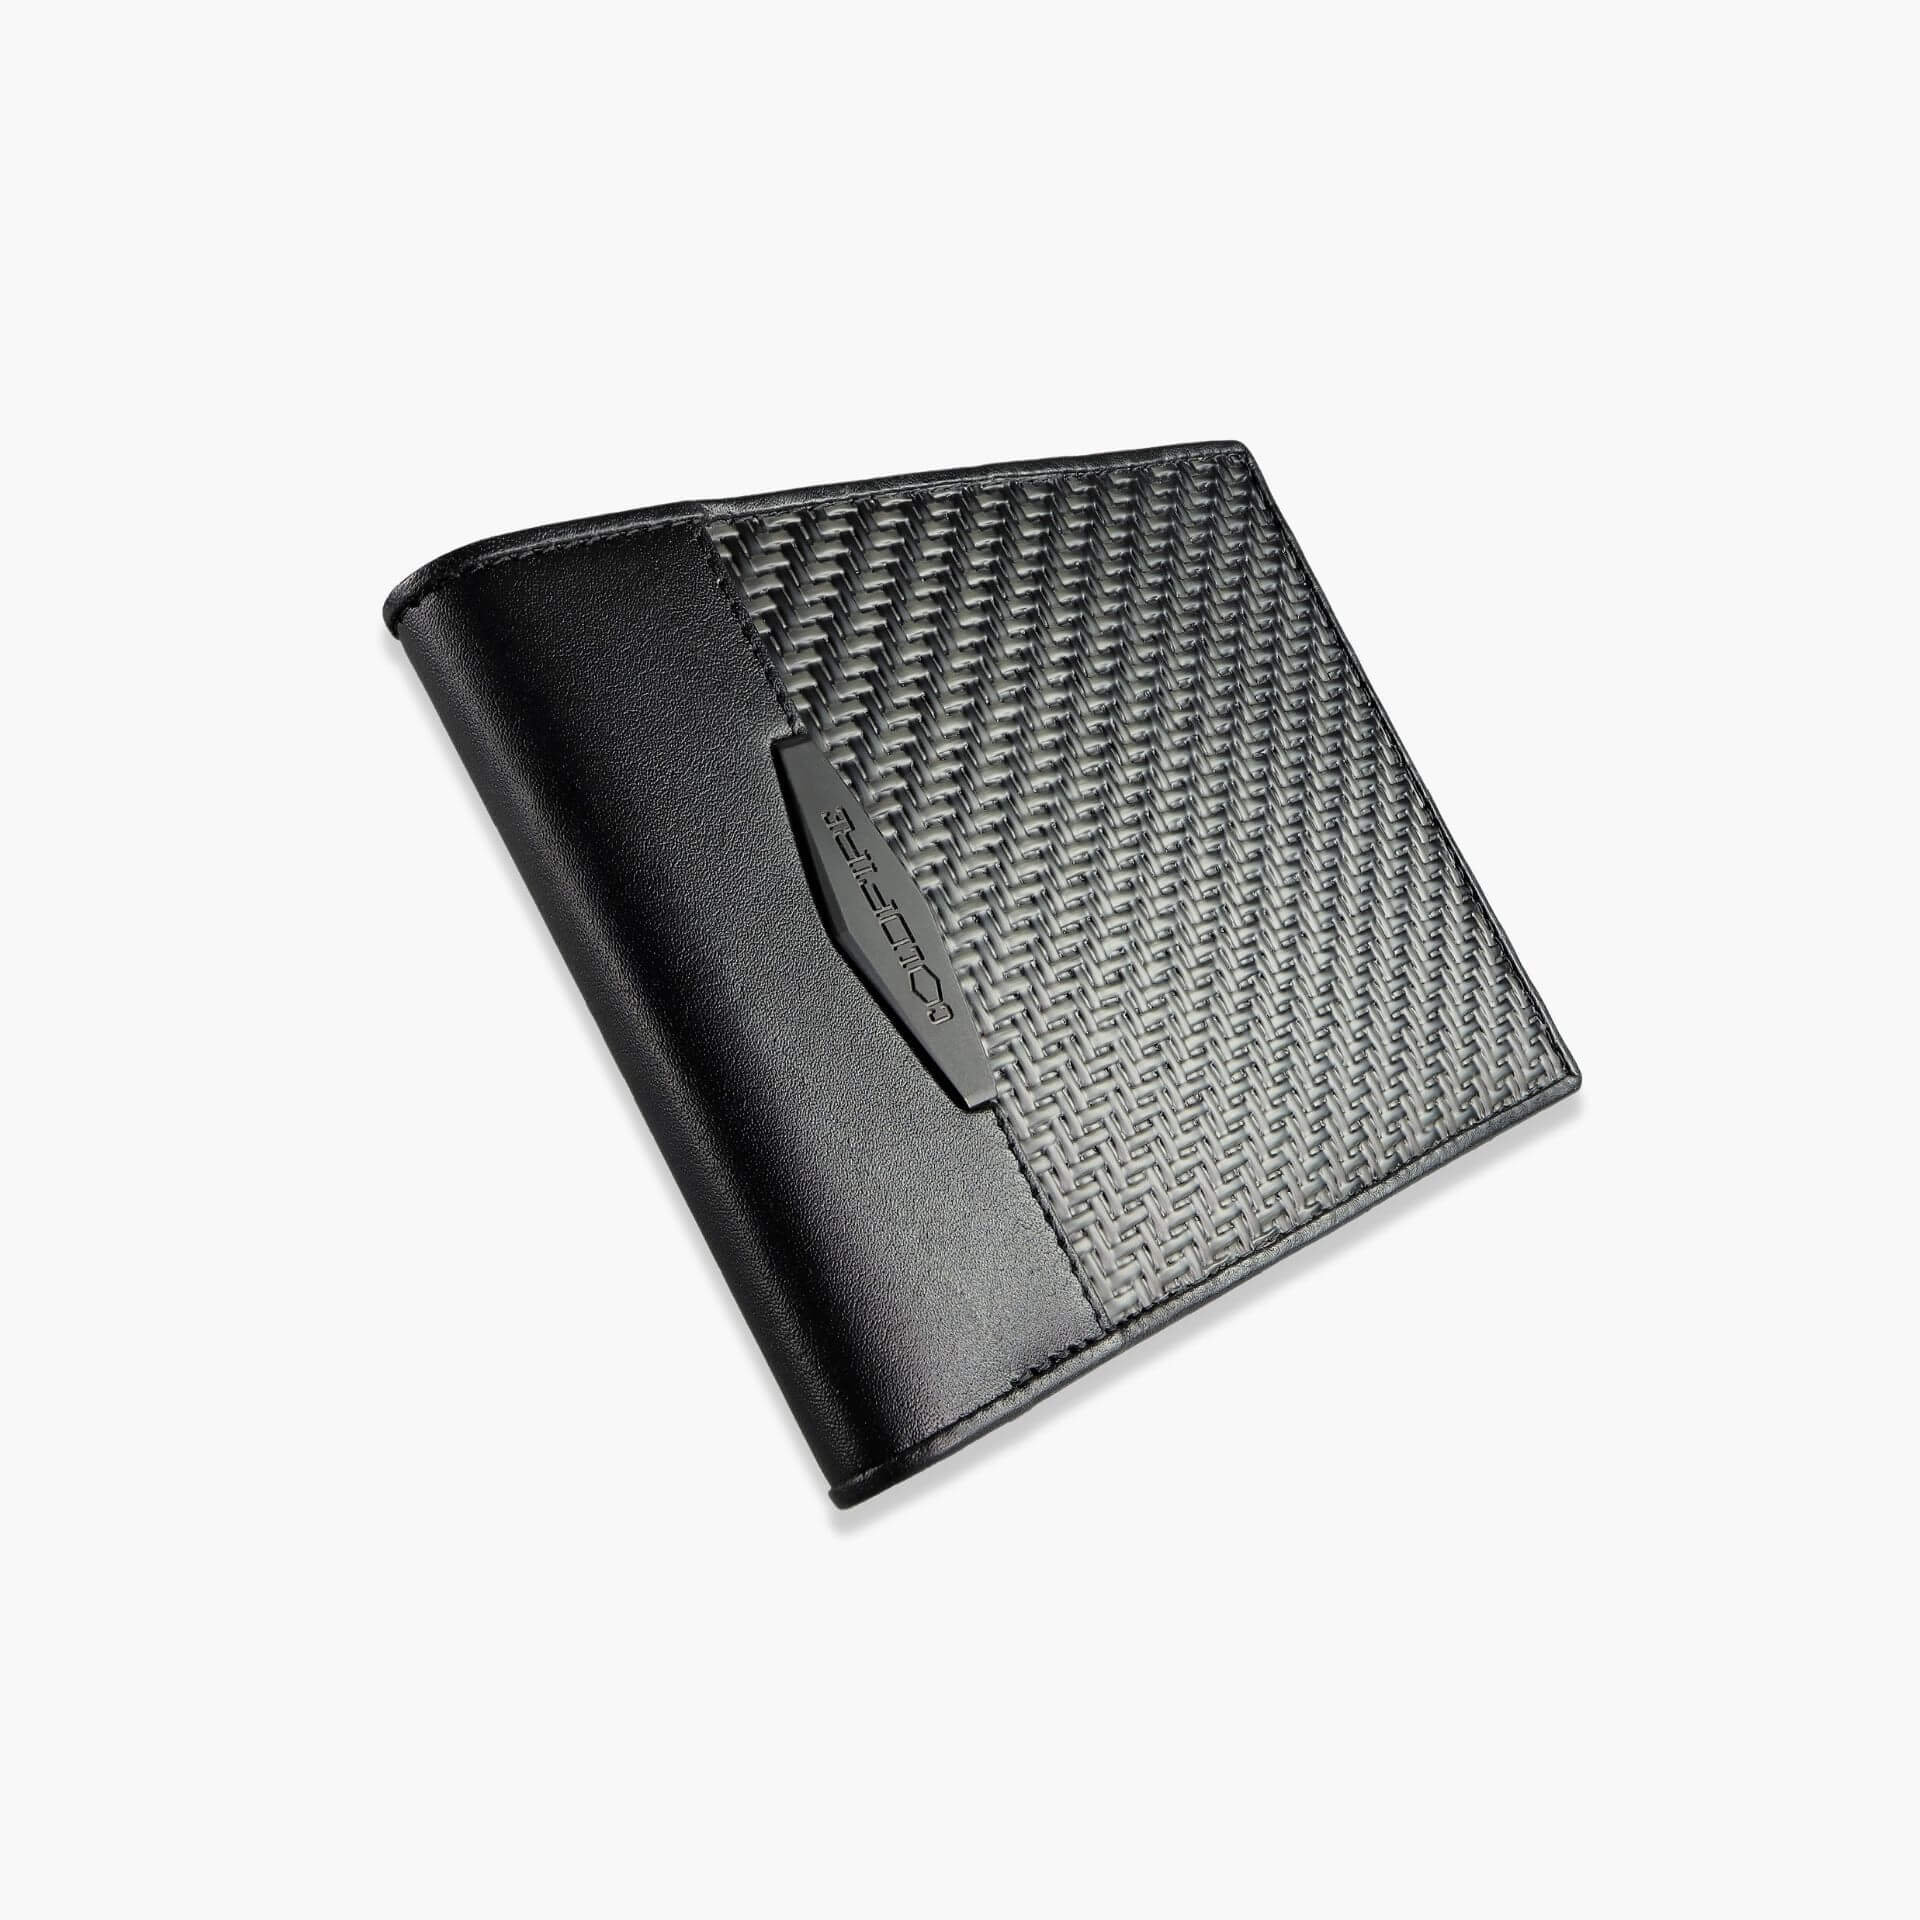 Carbon Fiber Wallet with Coin Pocket - COLDFIRE